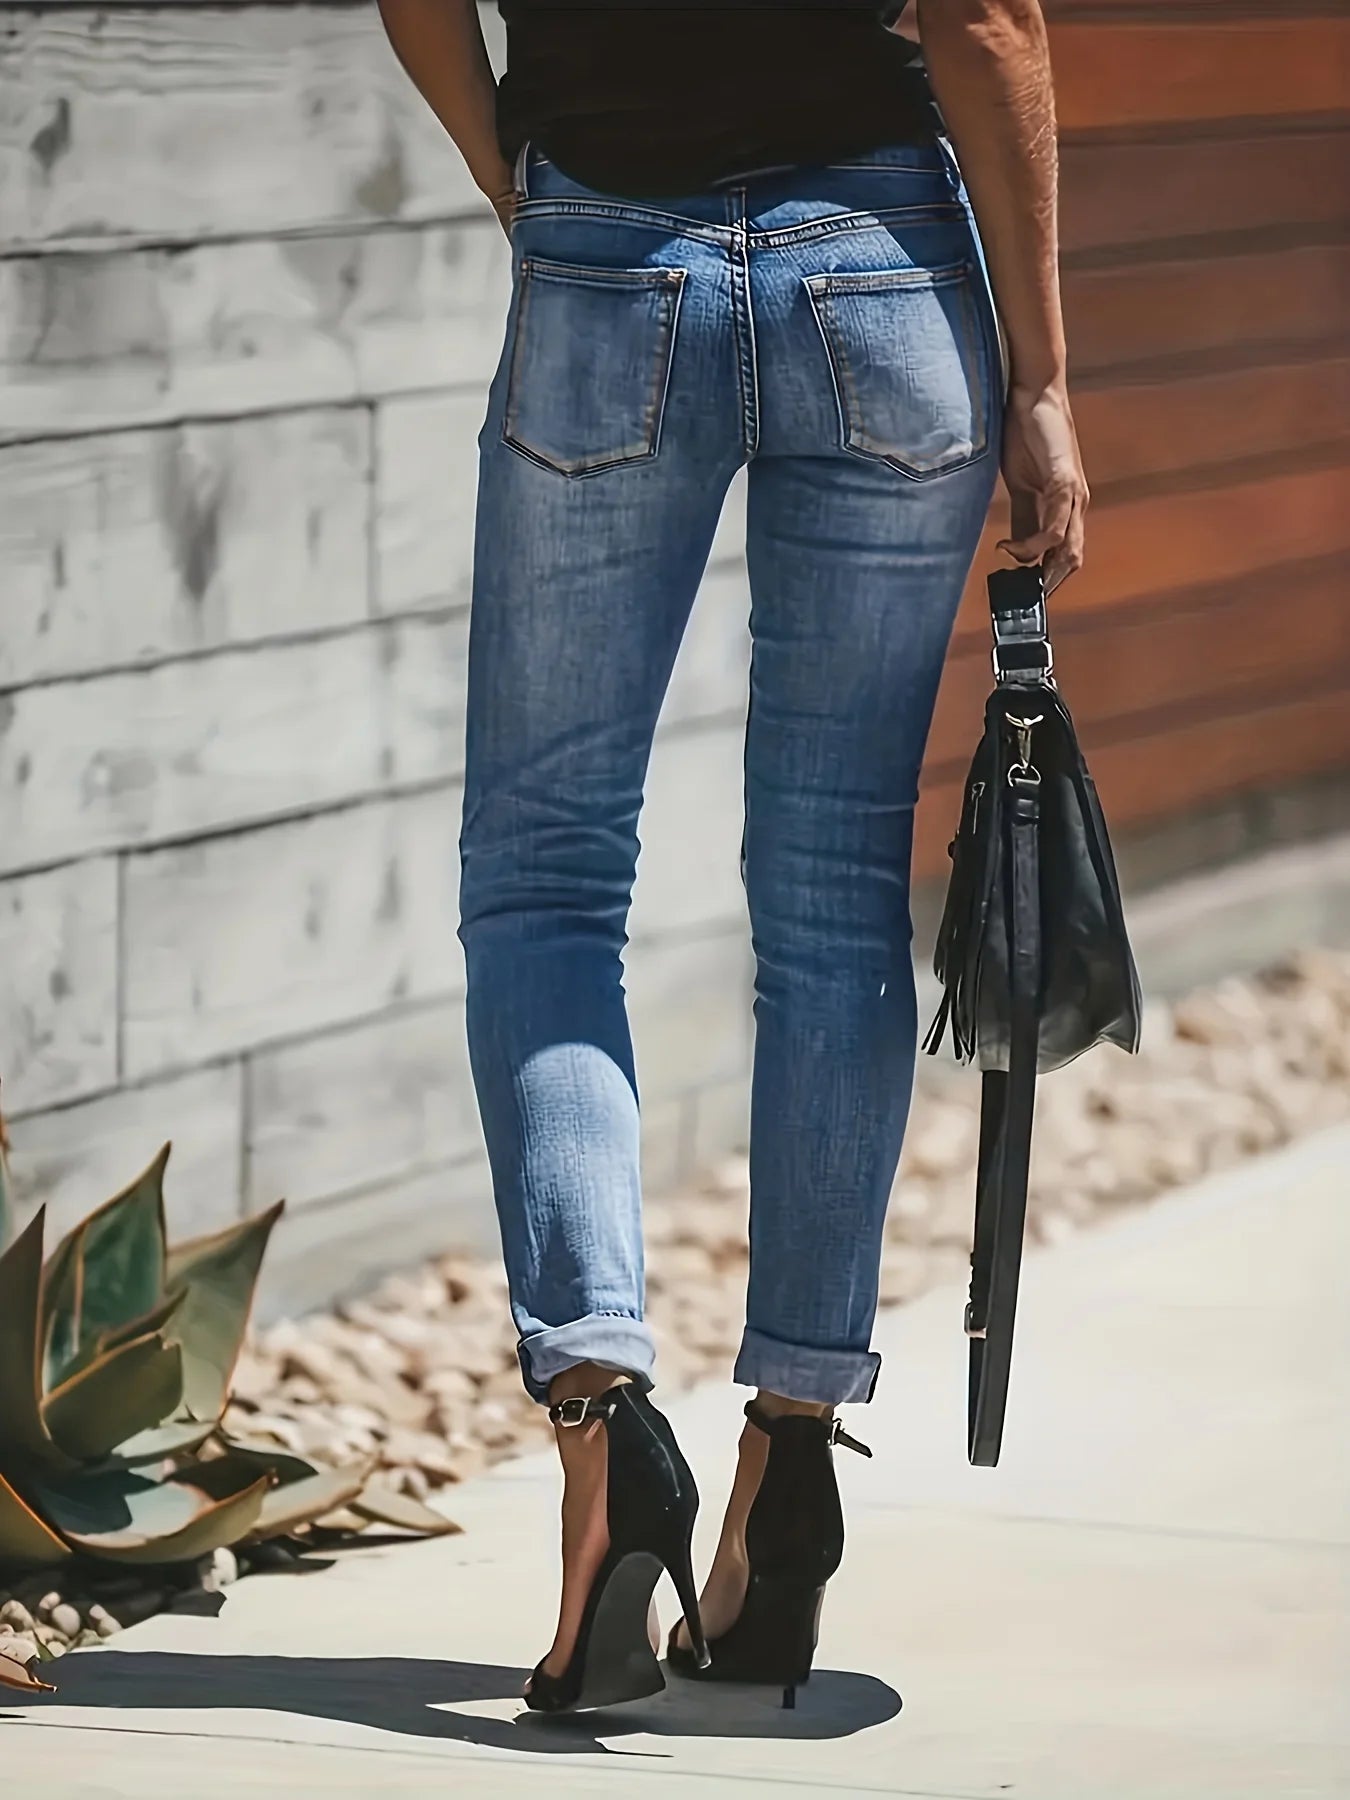 Chic Distressed Skyline Jeans